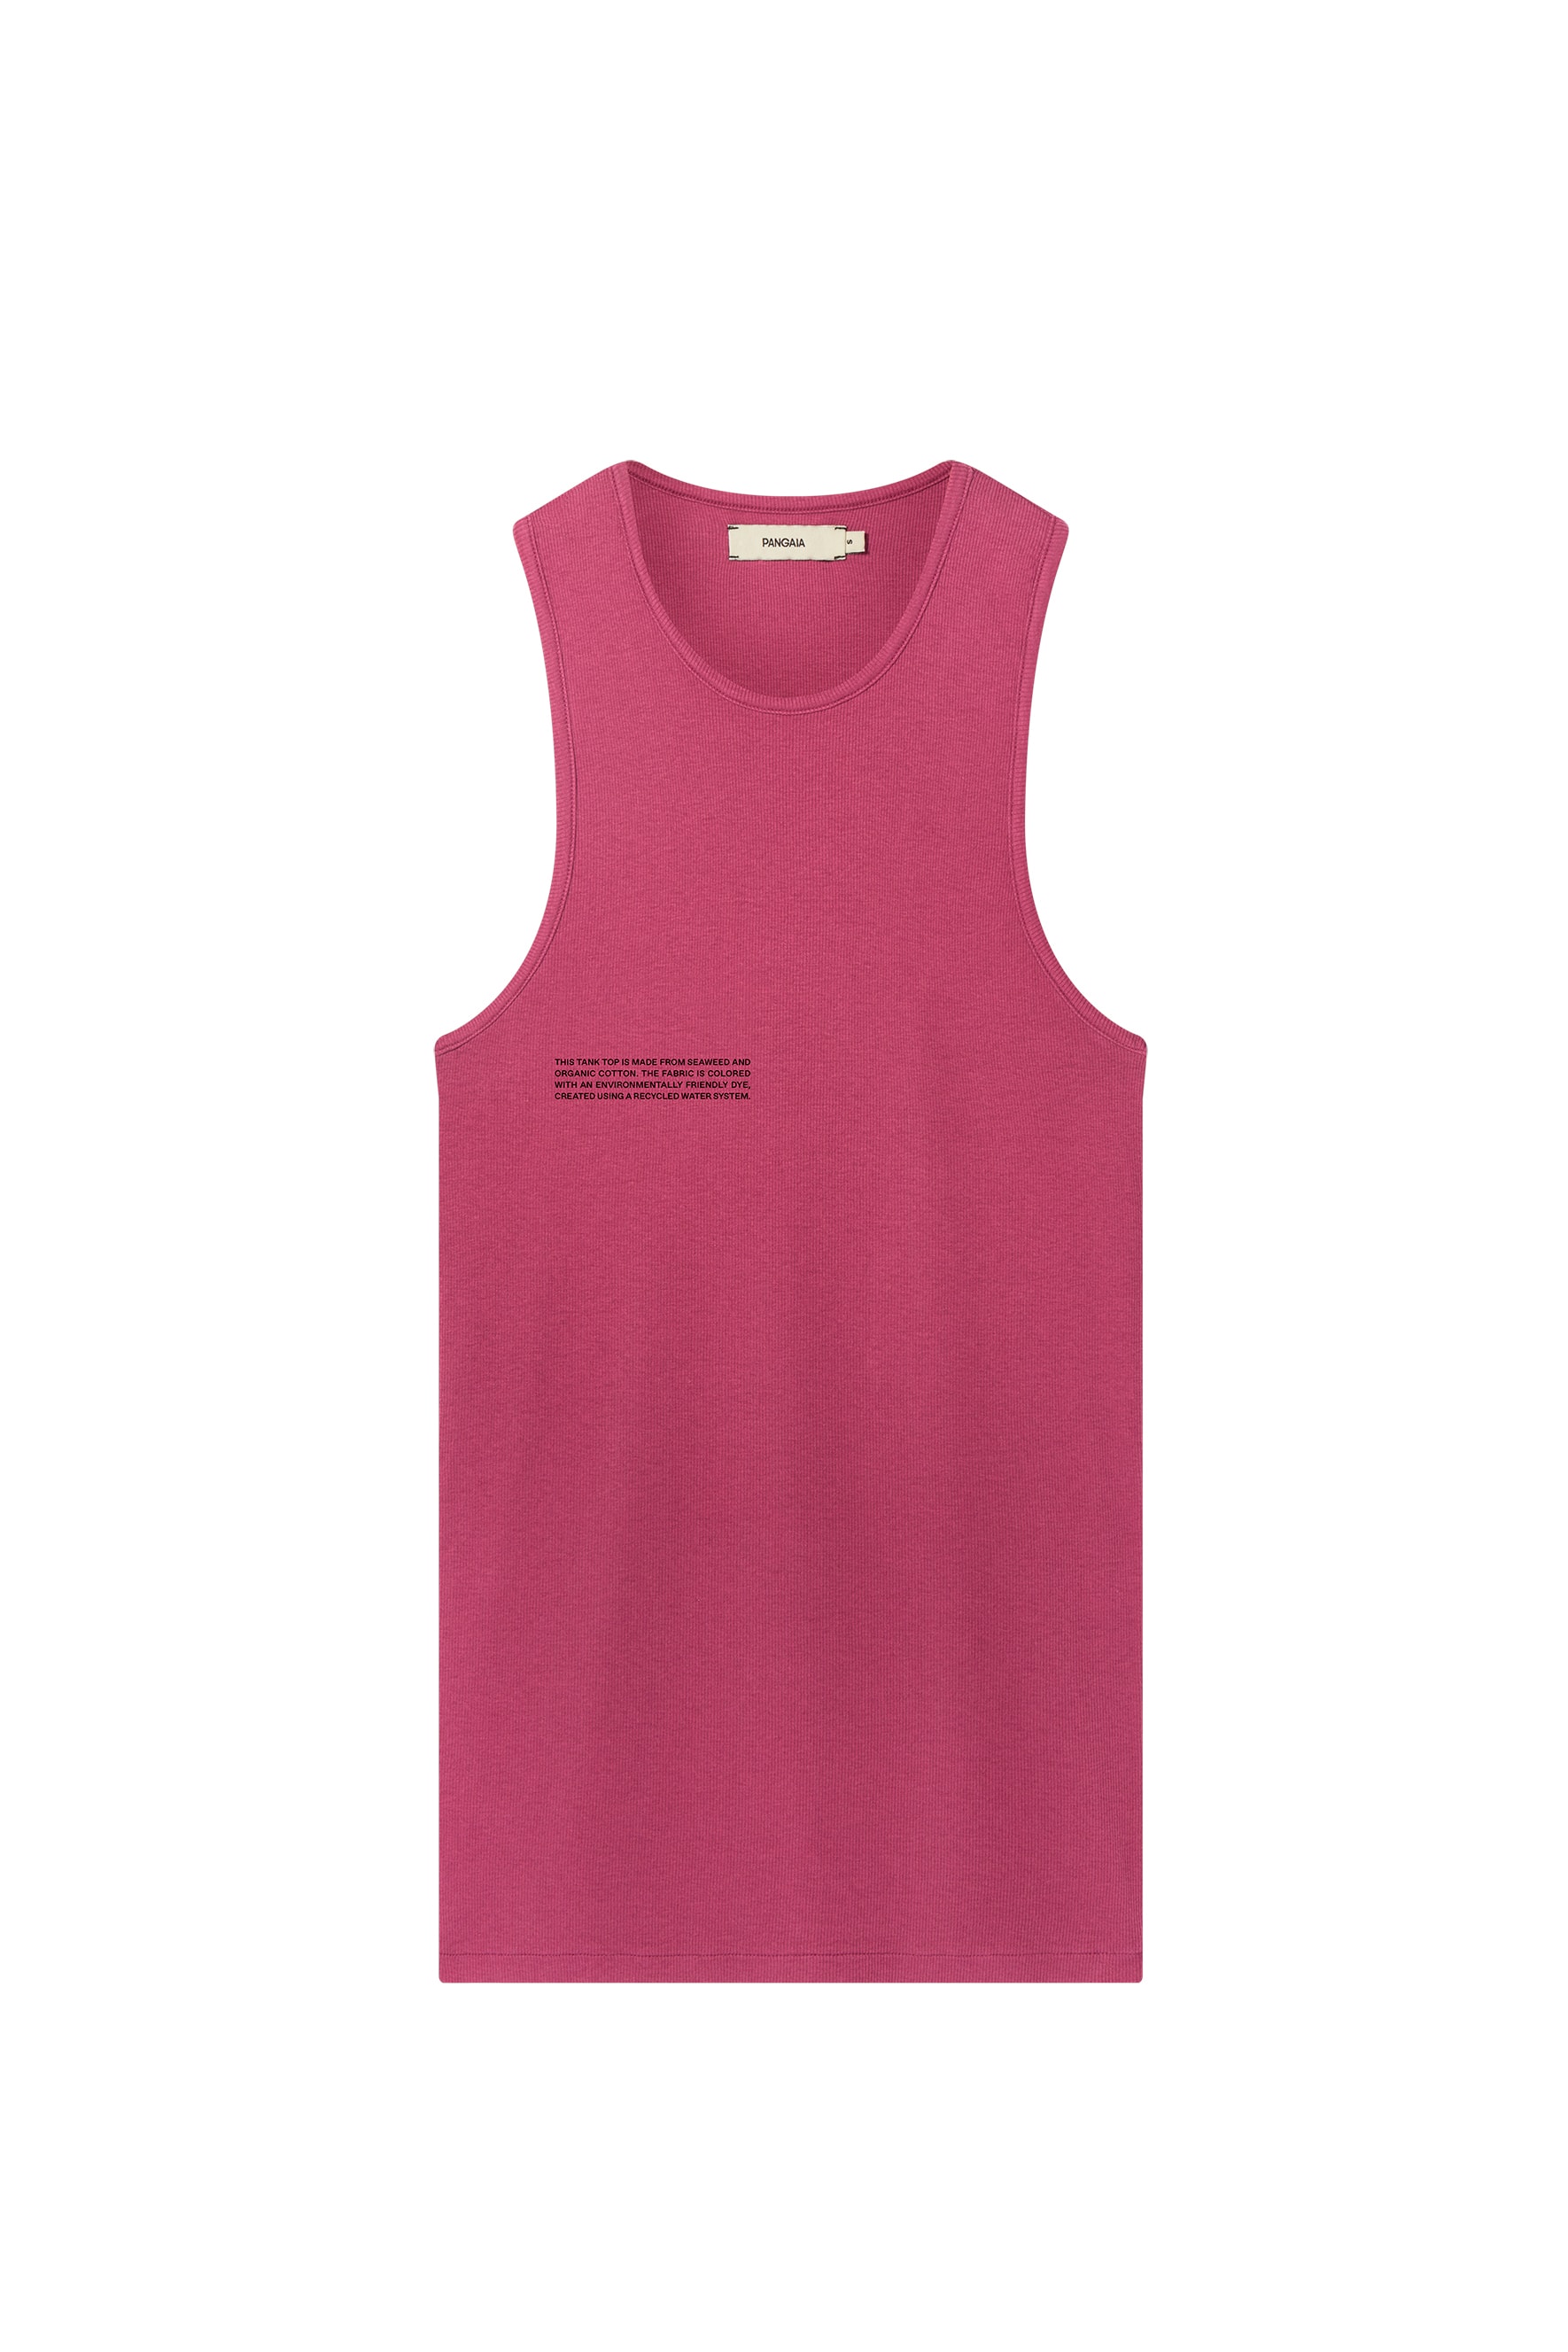 Pangaia Seaweed Tank Tops Dresses Release Dyed Sustainable Eco-friendly